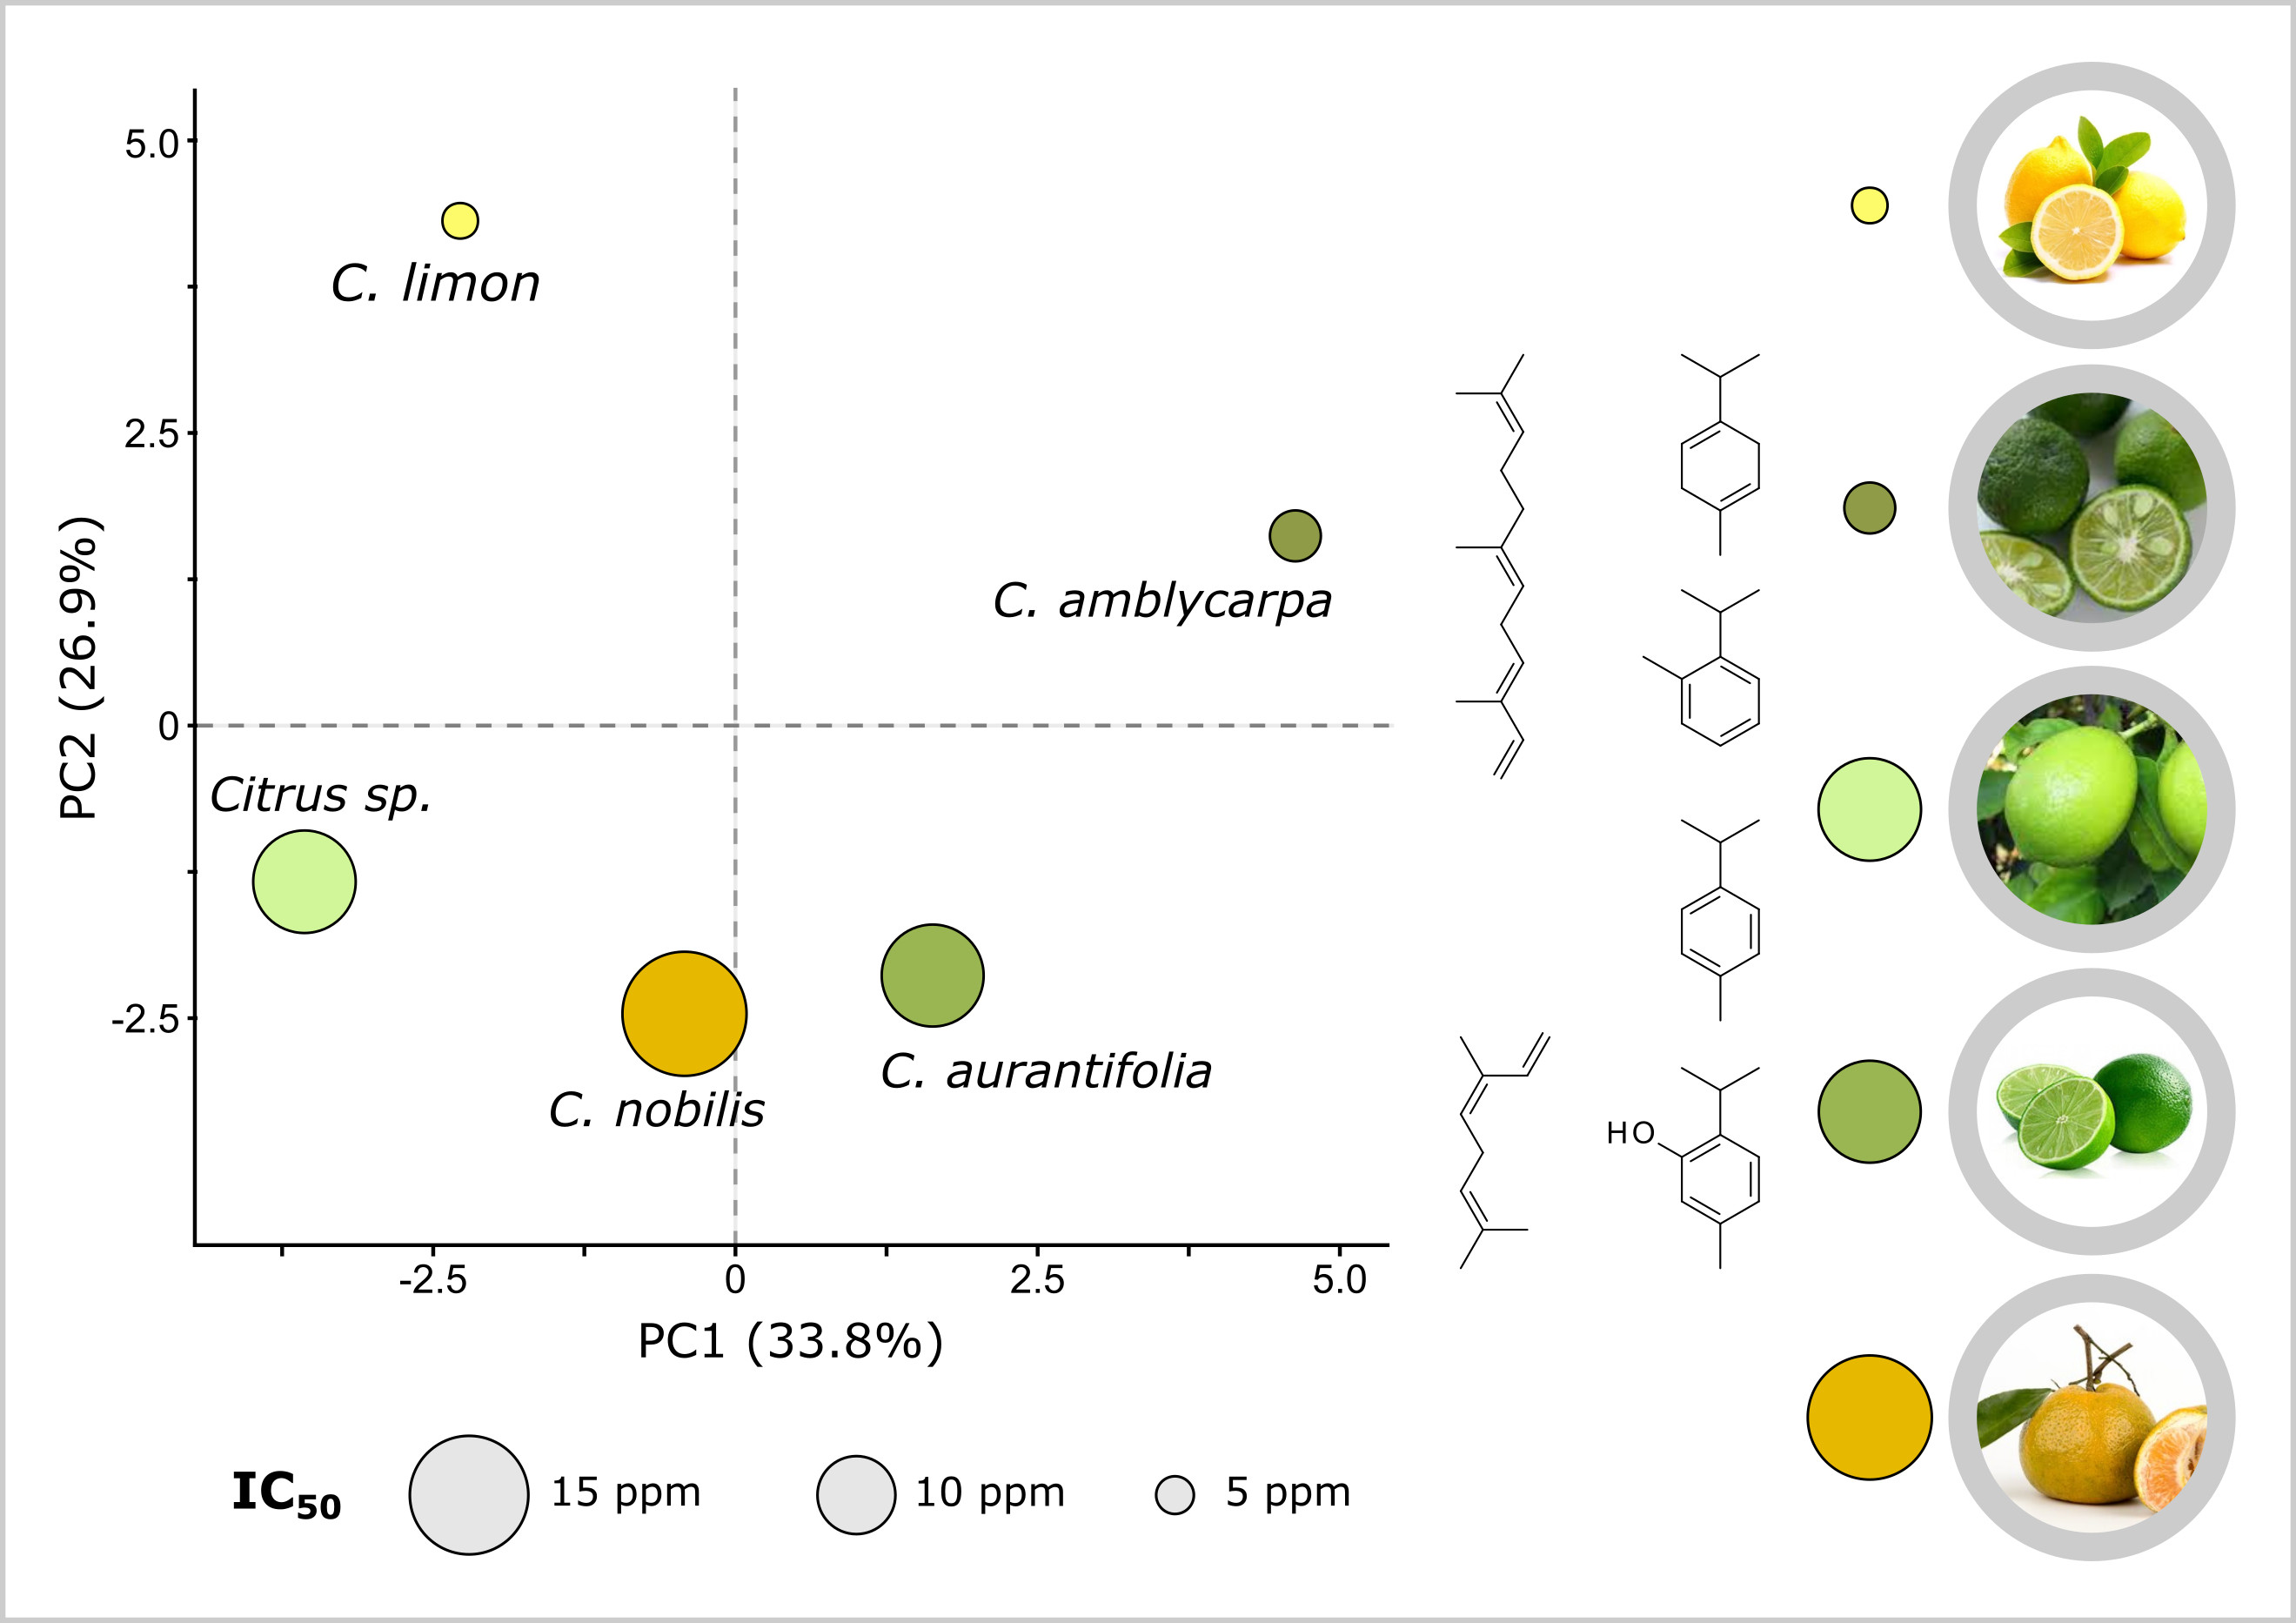 Chemical Compositions And Antioxidant Activities Of Indonesian Citrus Essential Oils And Their Elucidation Using Principal Component Analysis V1 Preprints